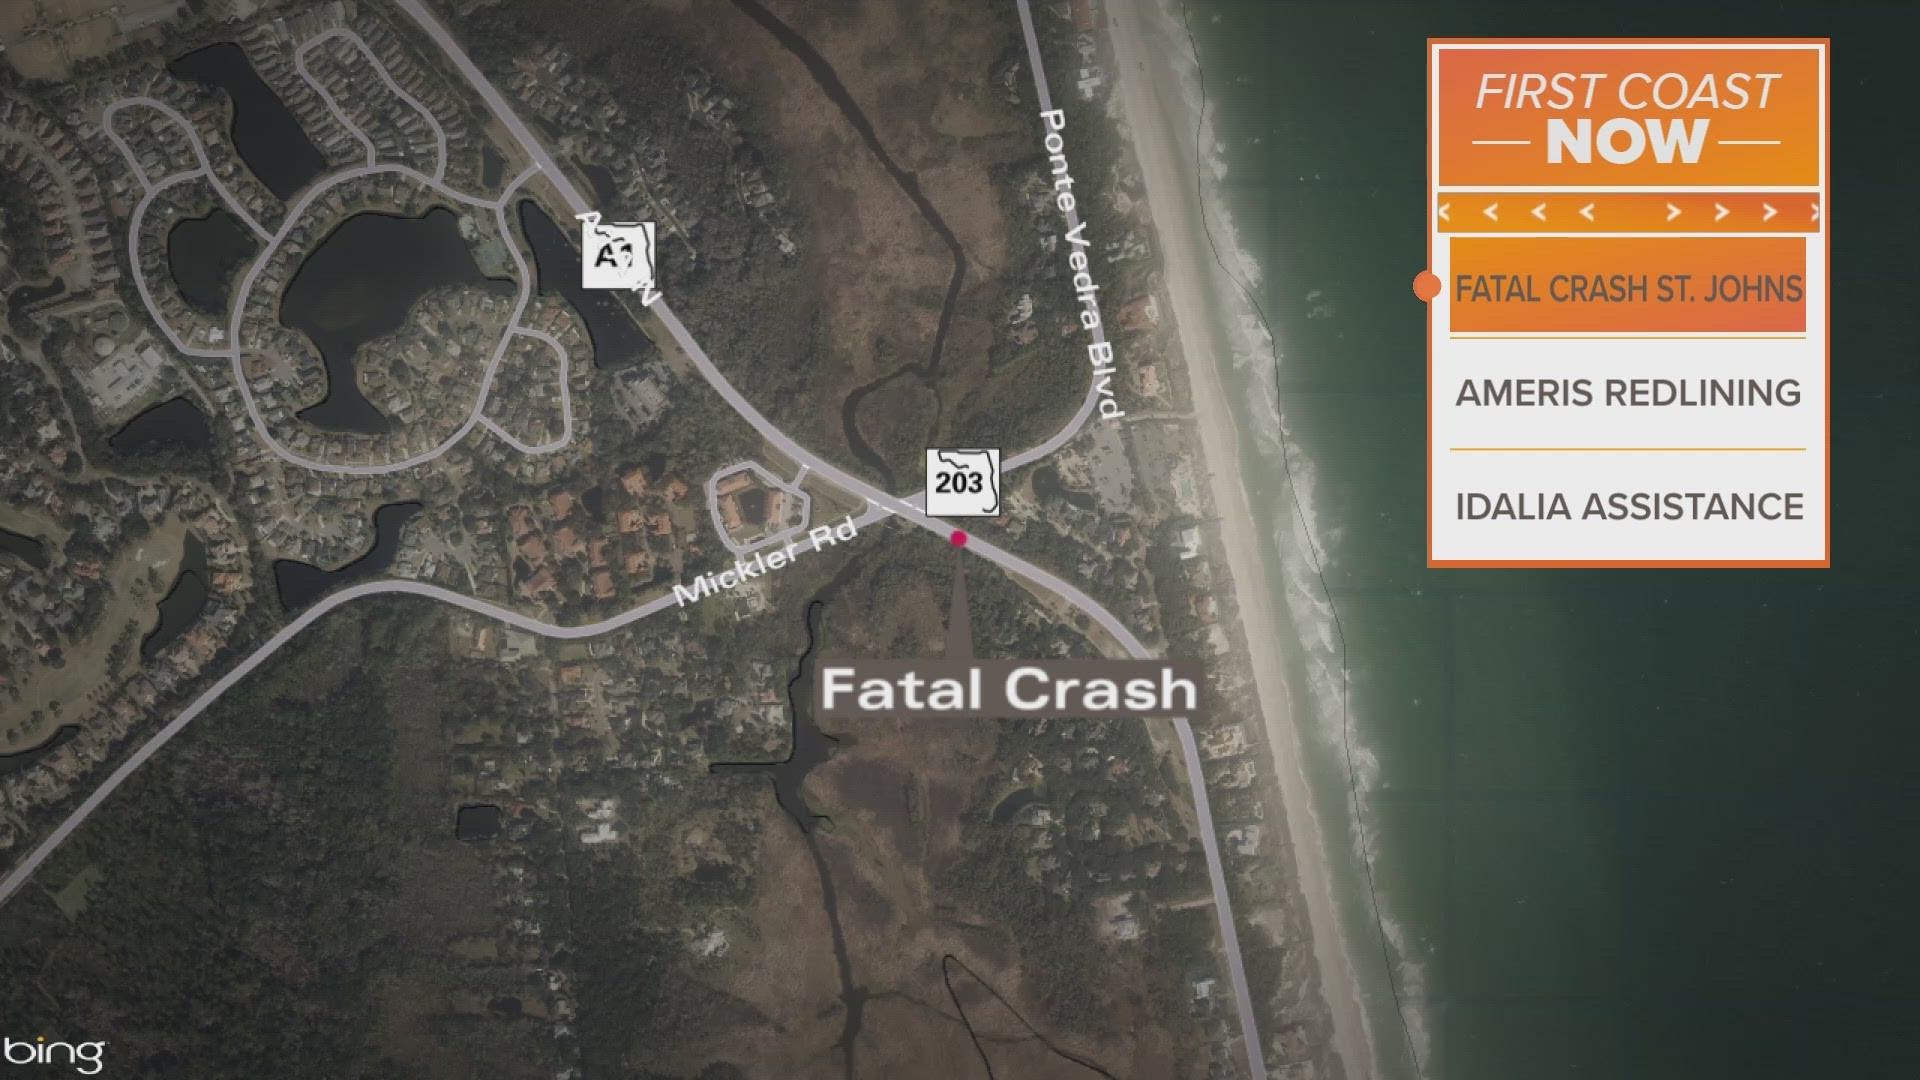 The bicyclist, a 47-year-old man, was hit while traveling south of Mikler Road on State Road A1A in St. Johns County, just after 9:30 p.m. on Saturday.